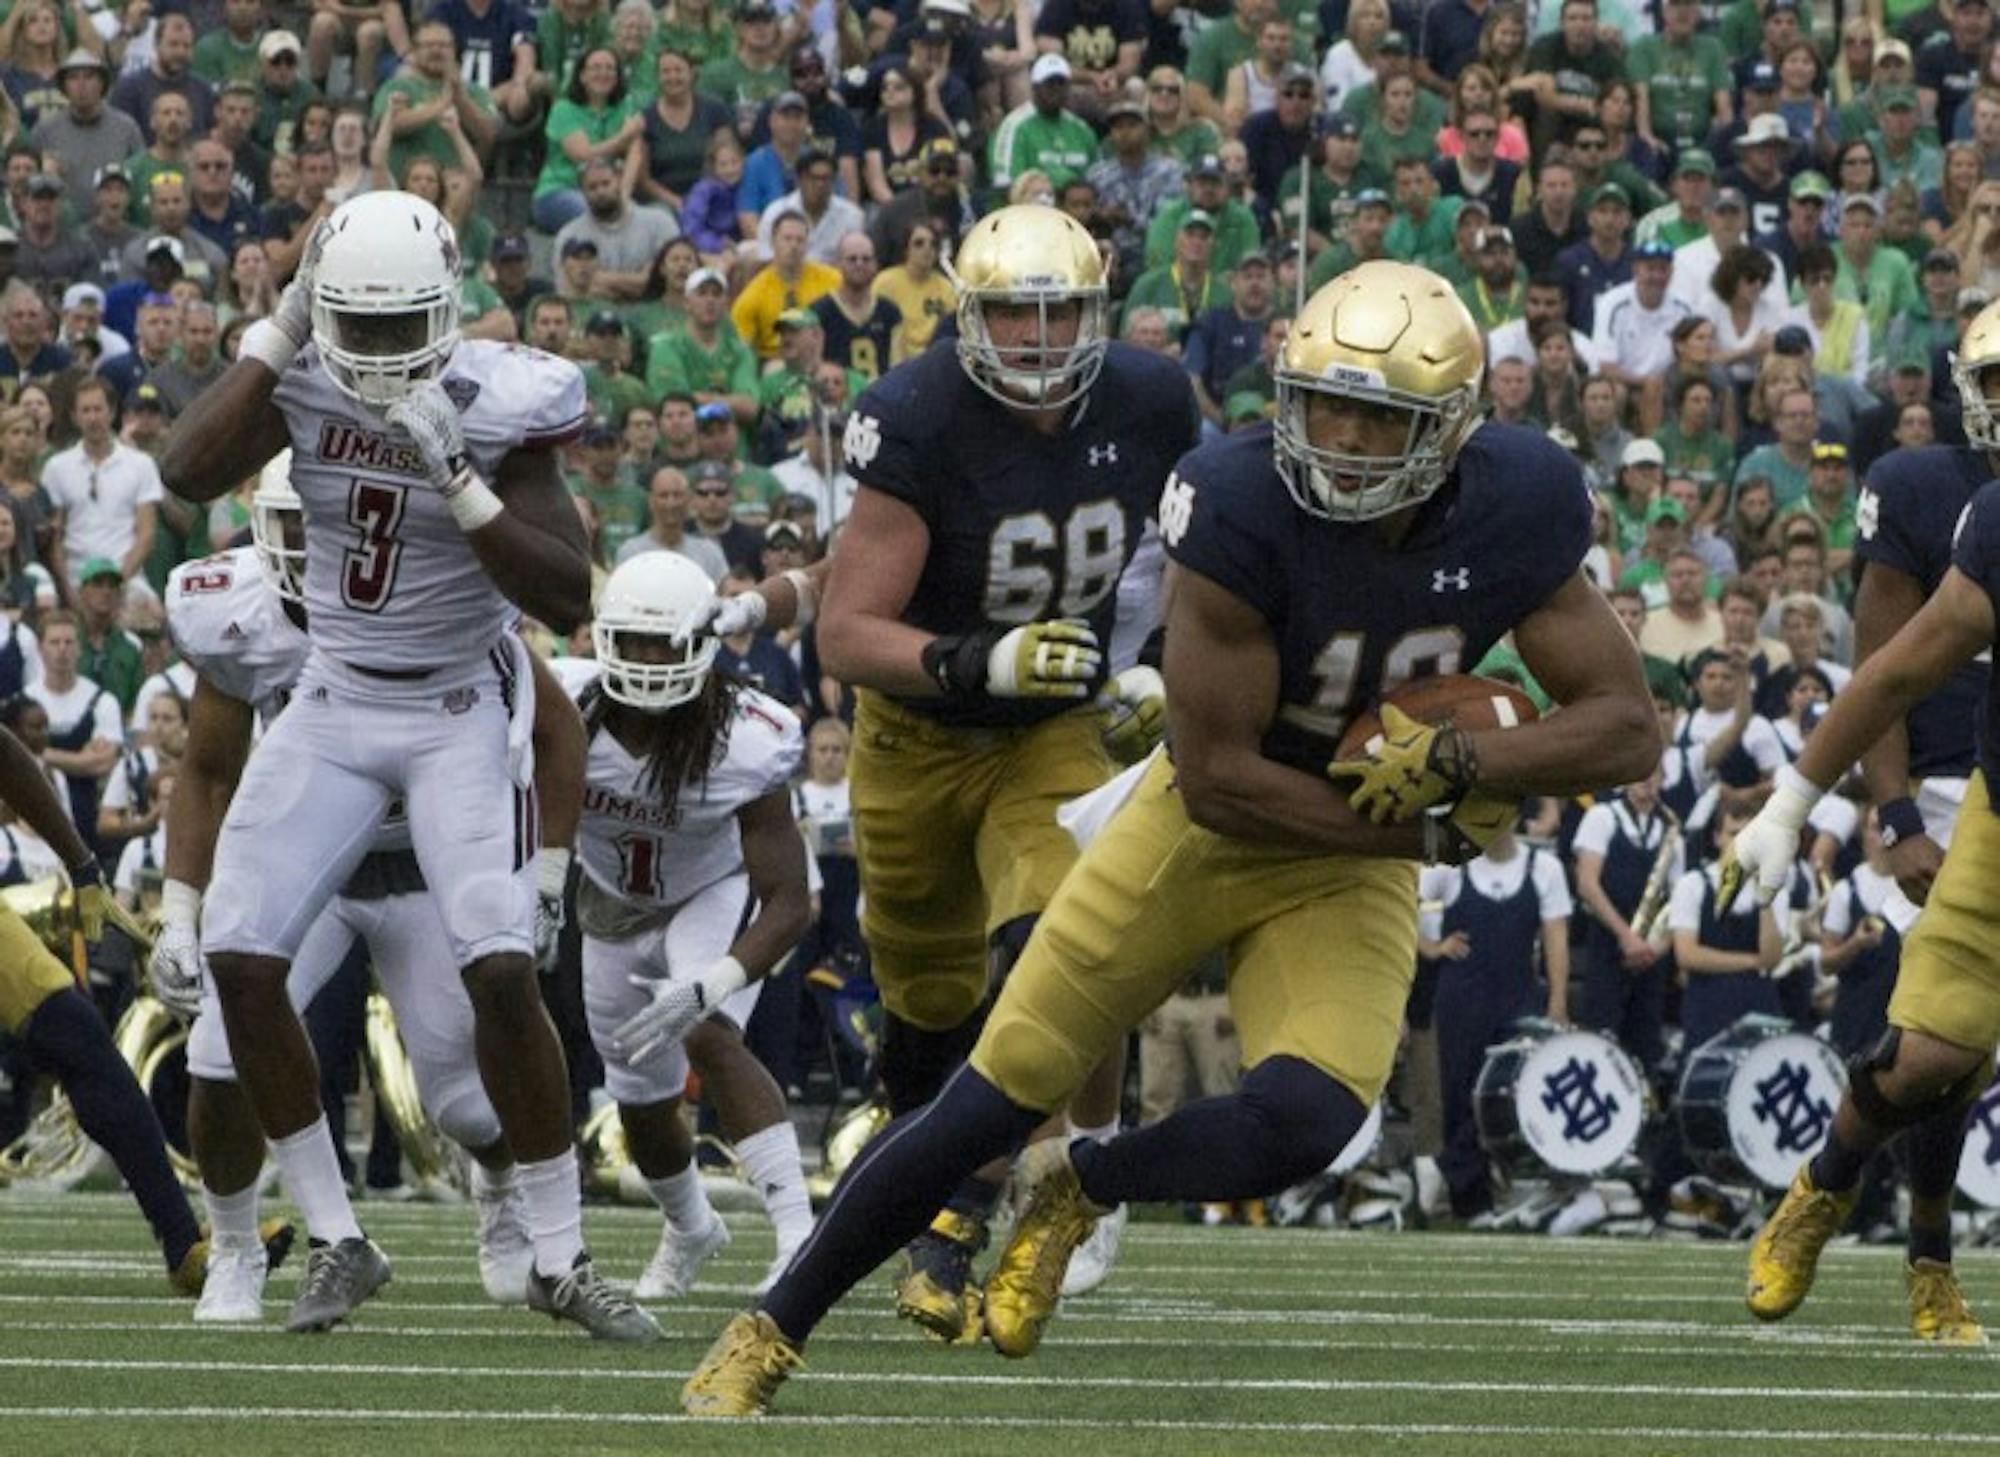 Freshman tight end Alizé Jones runs in space following a reception during Notre Dame’s 62-27 win over Massachusetts. Jones was one of eight Irish players to catch a pass in Saturday’s victory.